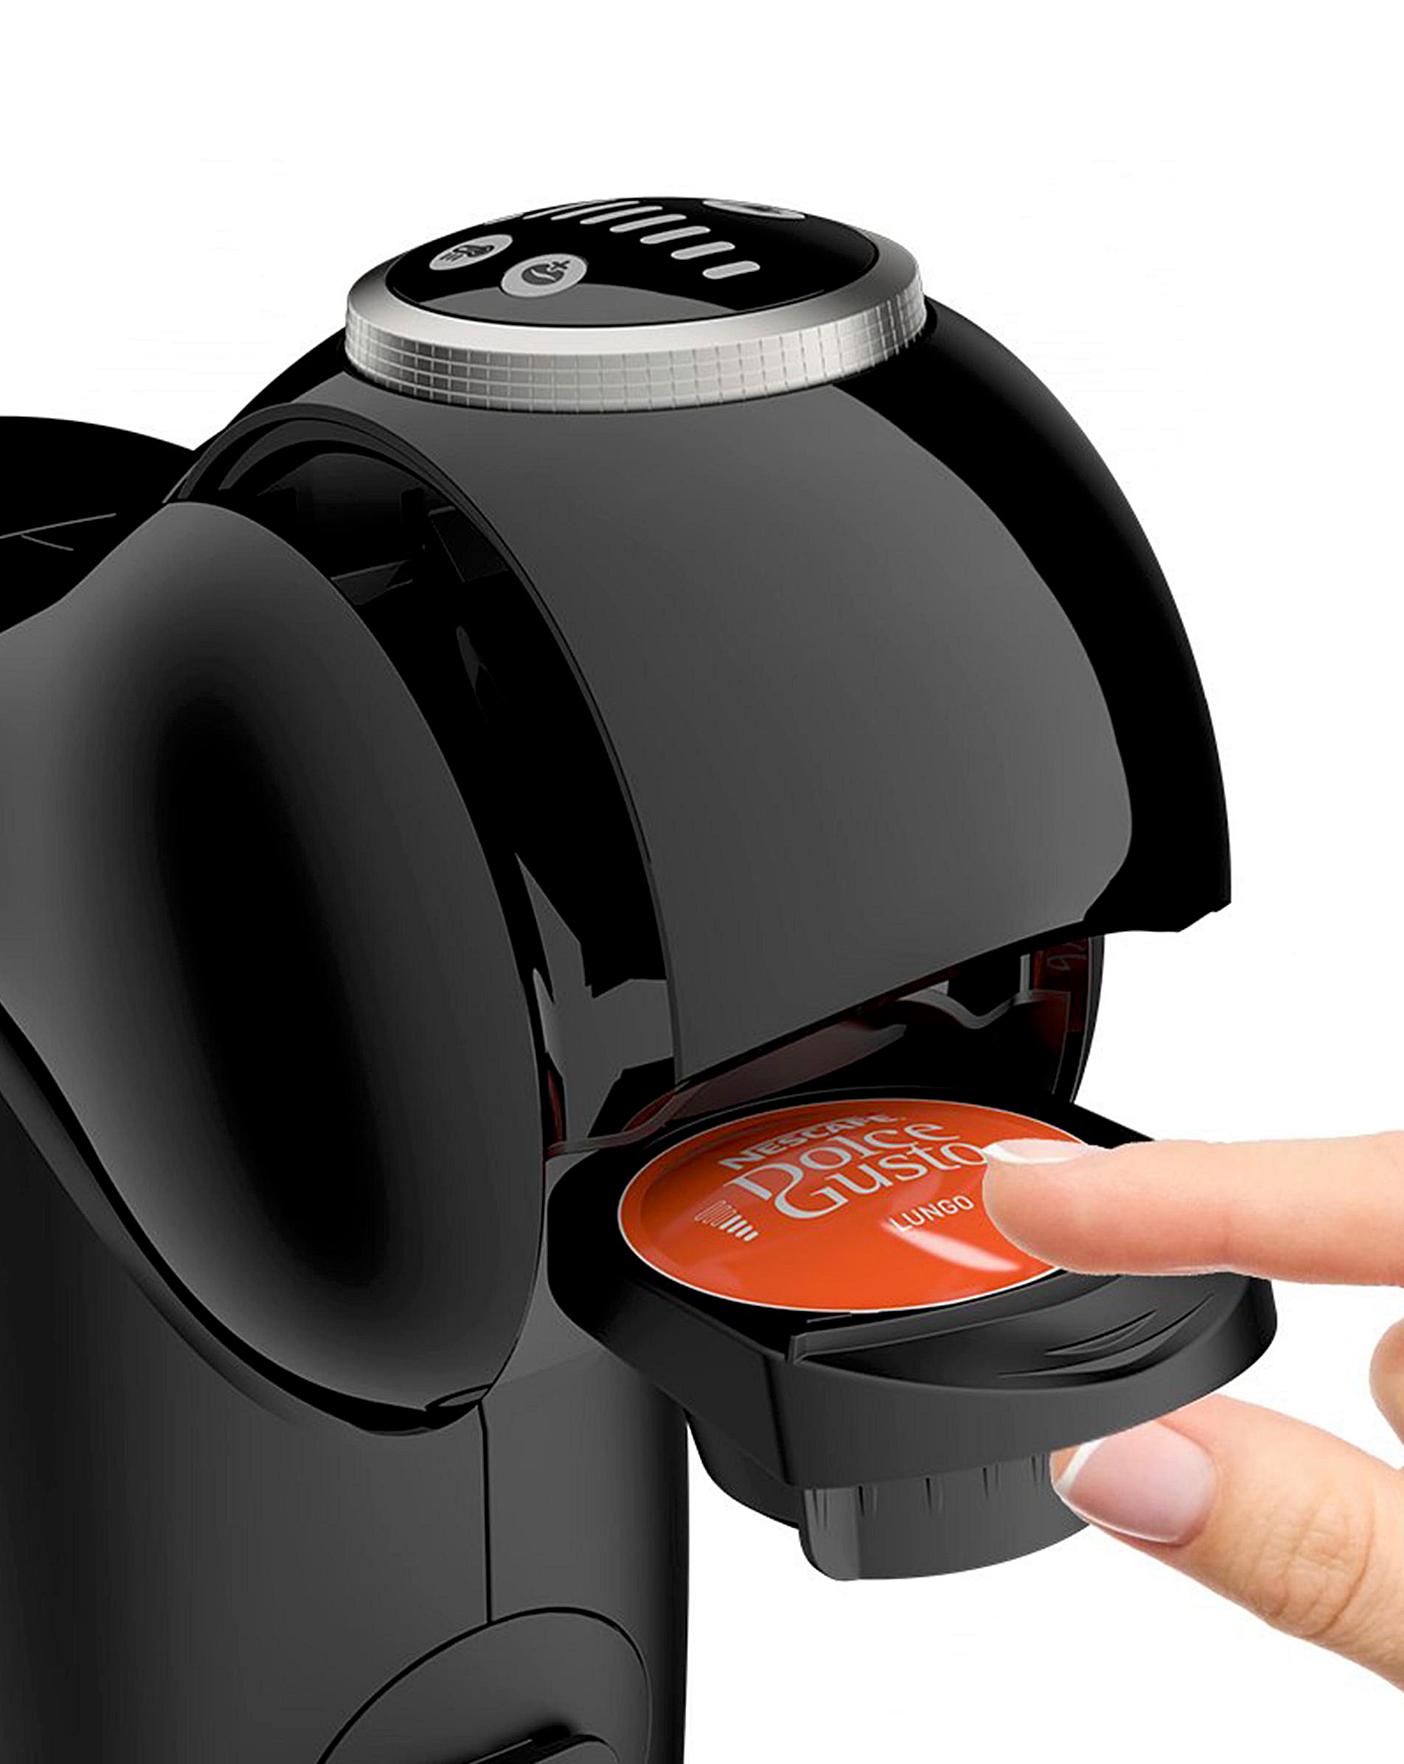 Krups Dolce gusto Genio s Plus kp340. Dolce gusto Genio s Plus. Dolce gusto Krups Genio s Plus. Нескафе Дольче густо kp340.